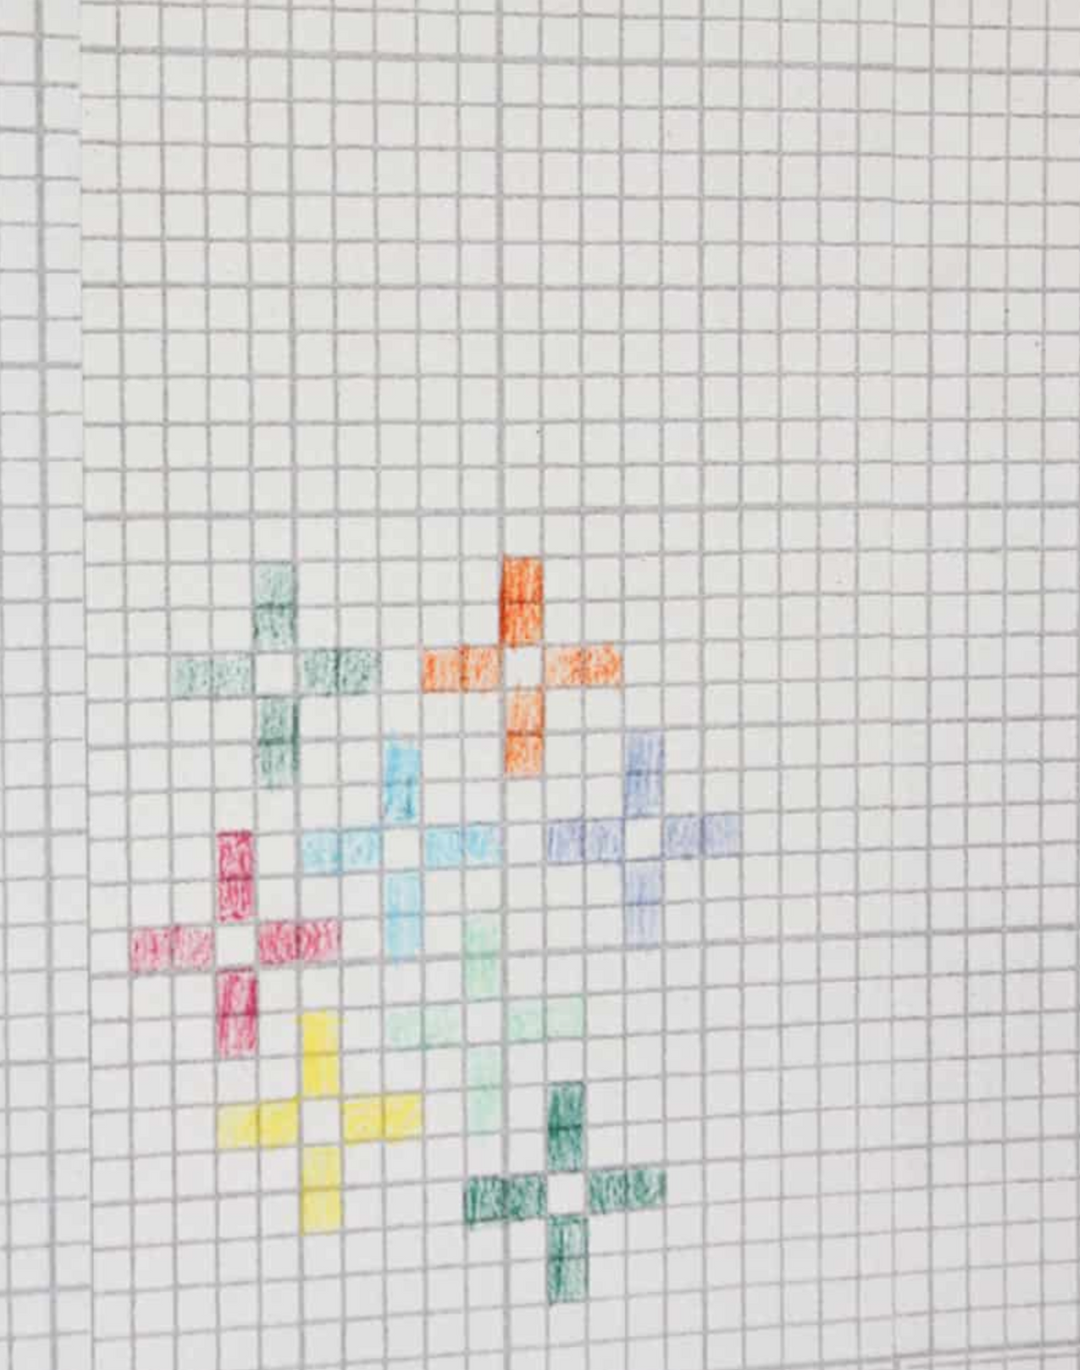 cool patterns on graph paper